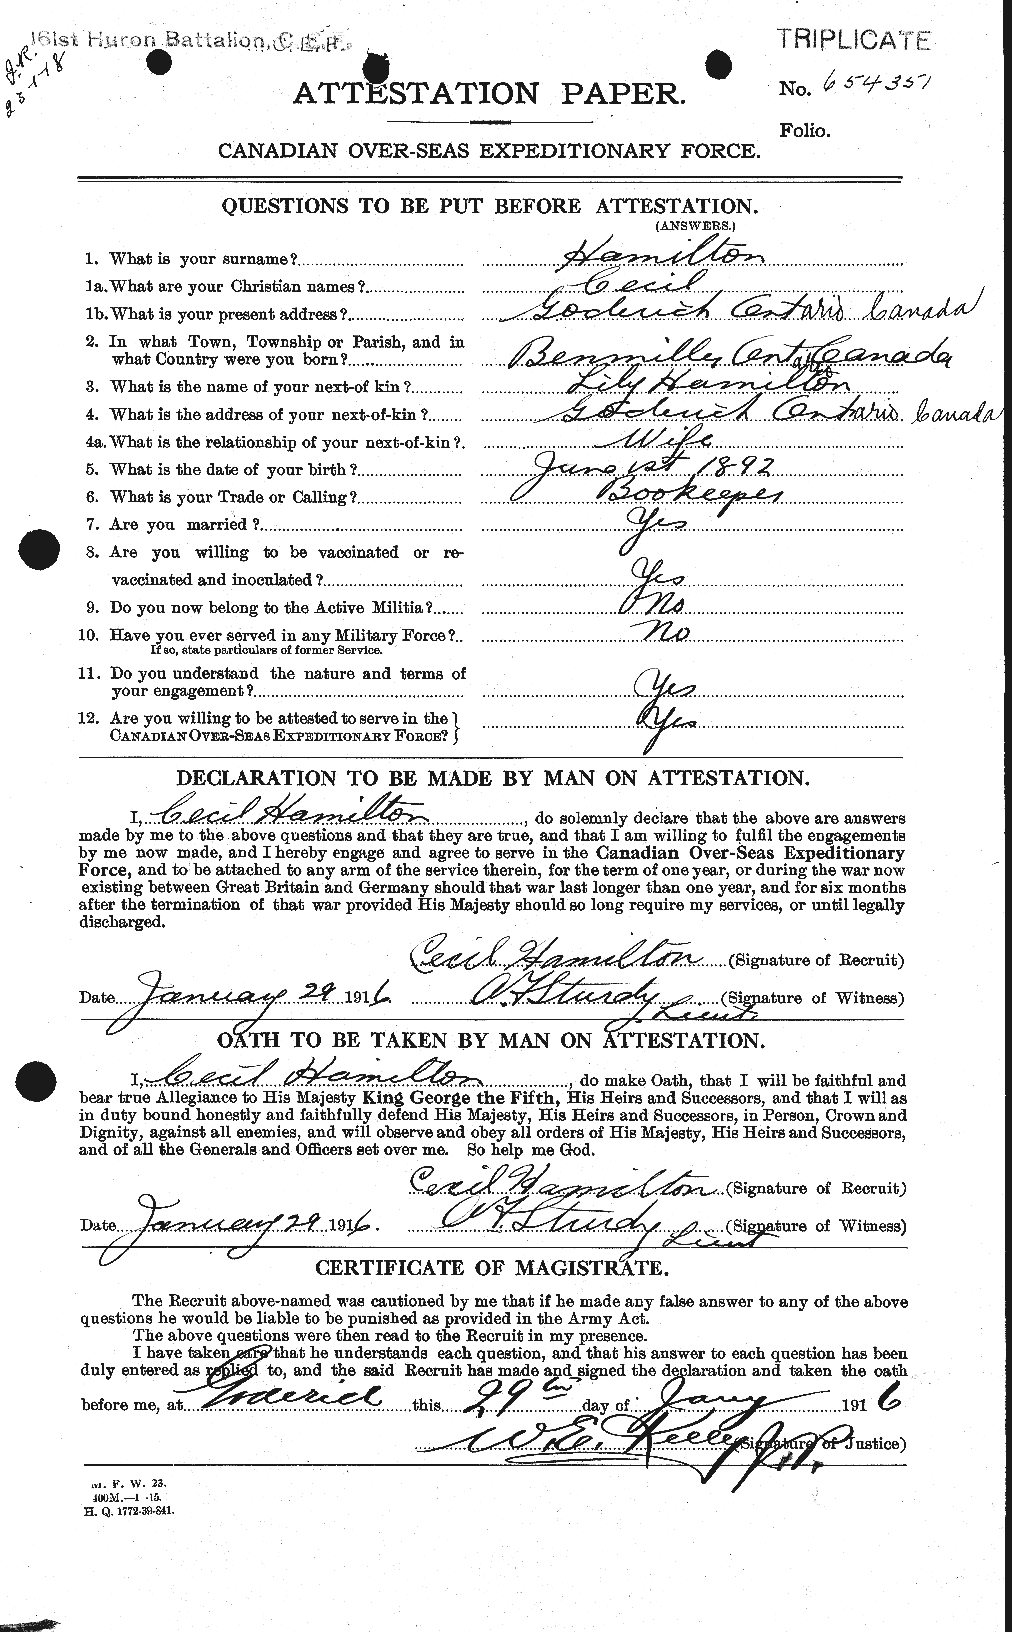 Personnel Records of the First World War - CEF 375286a